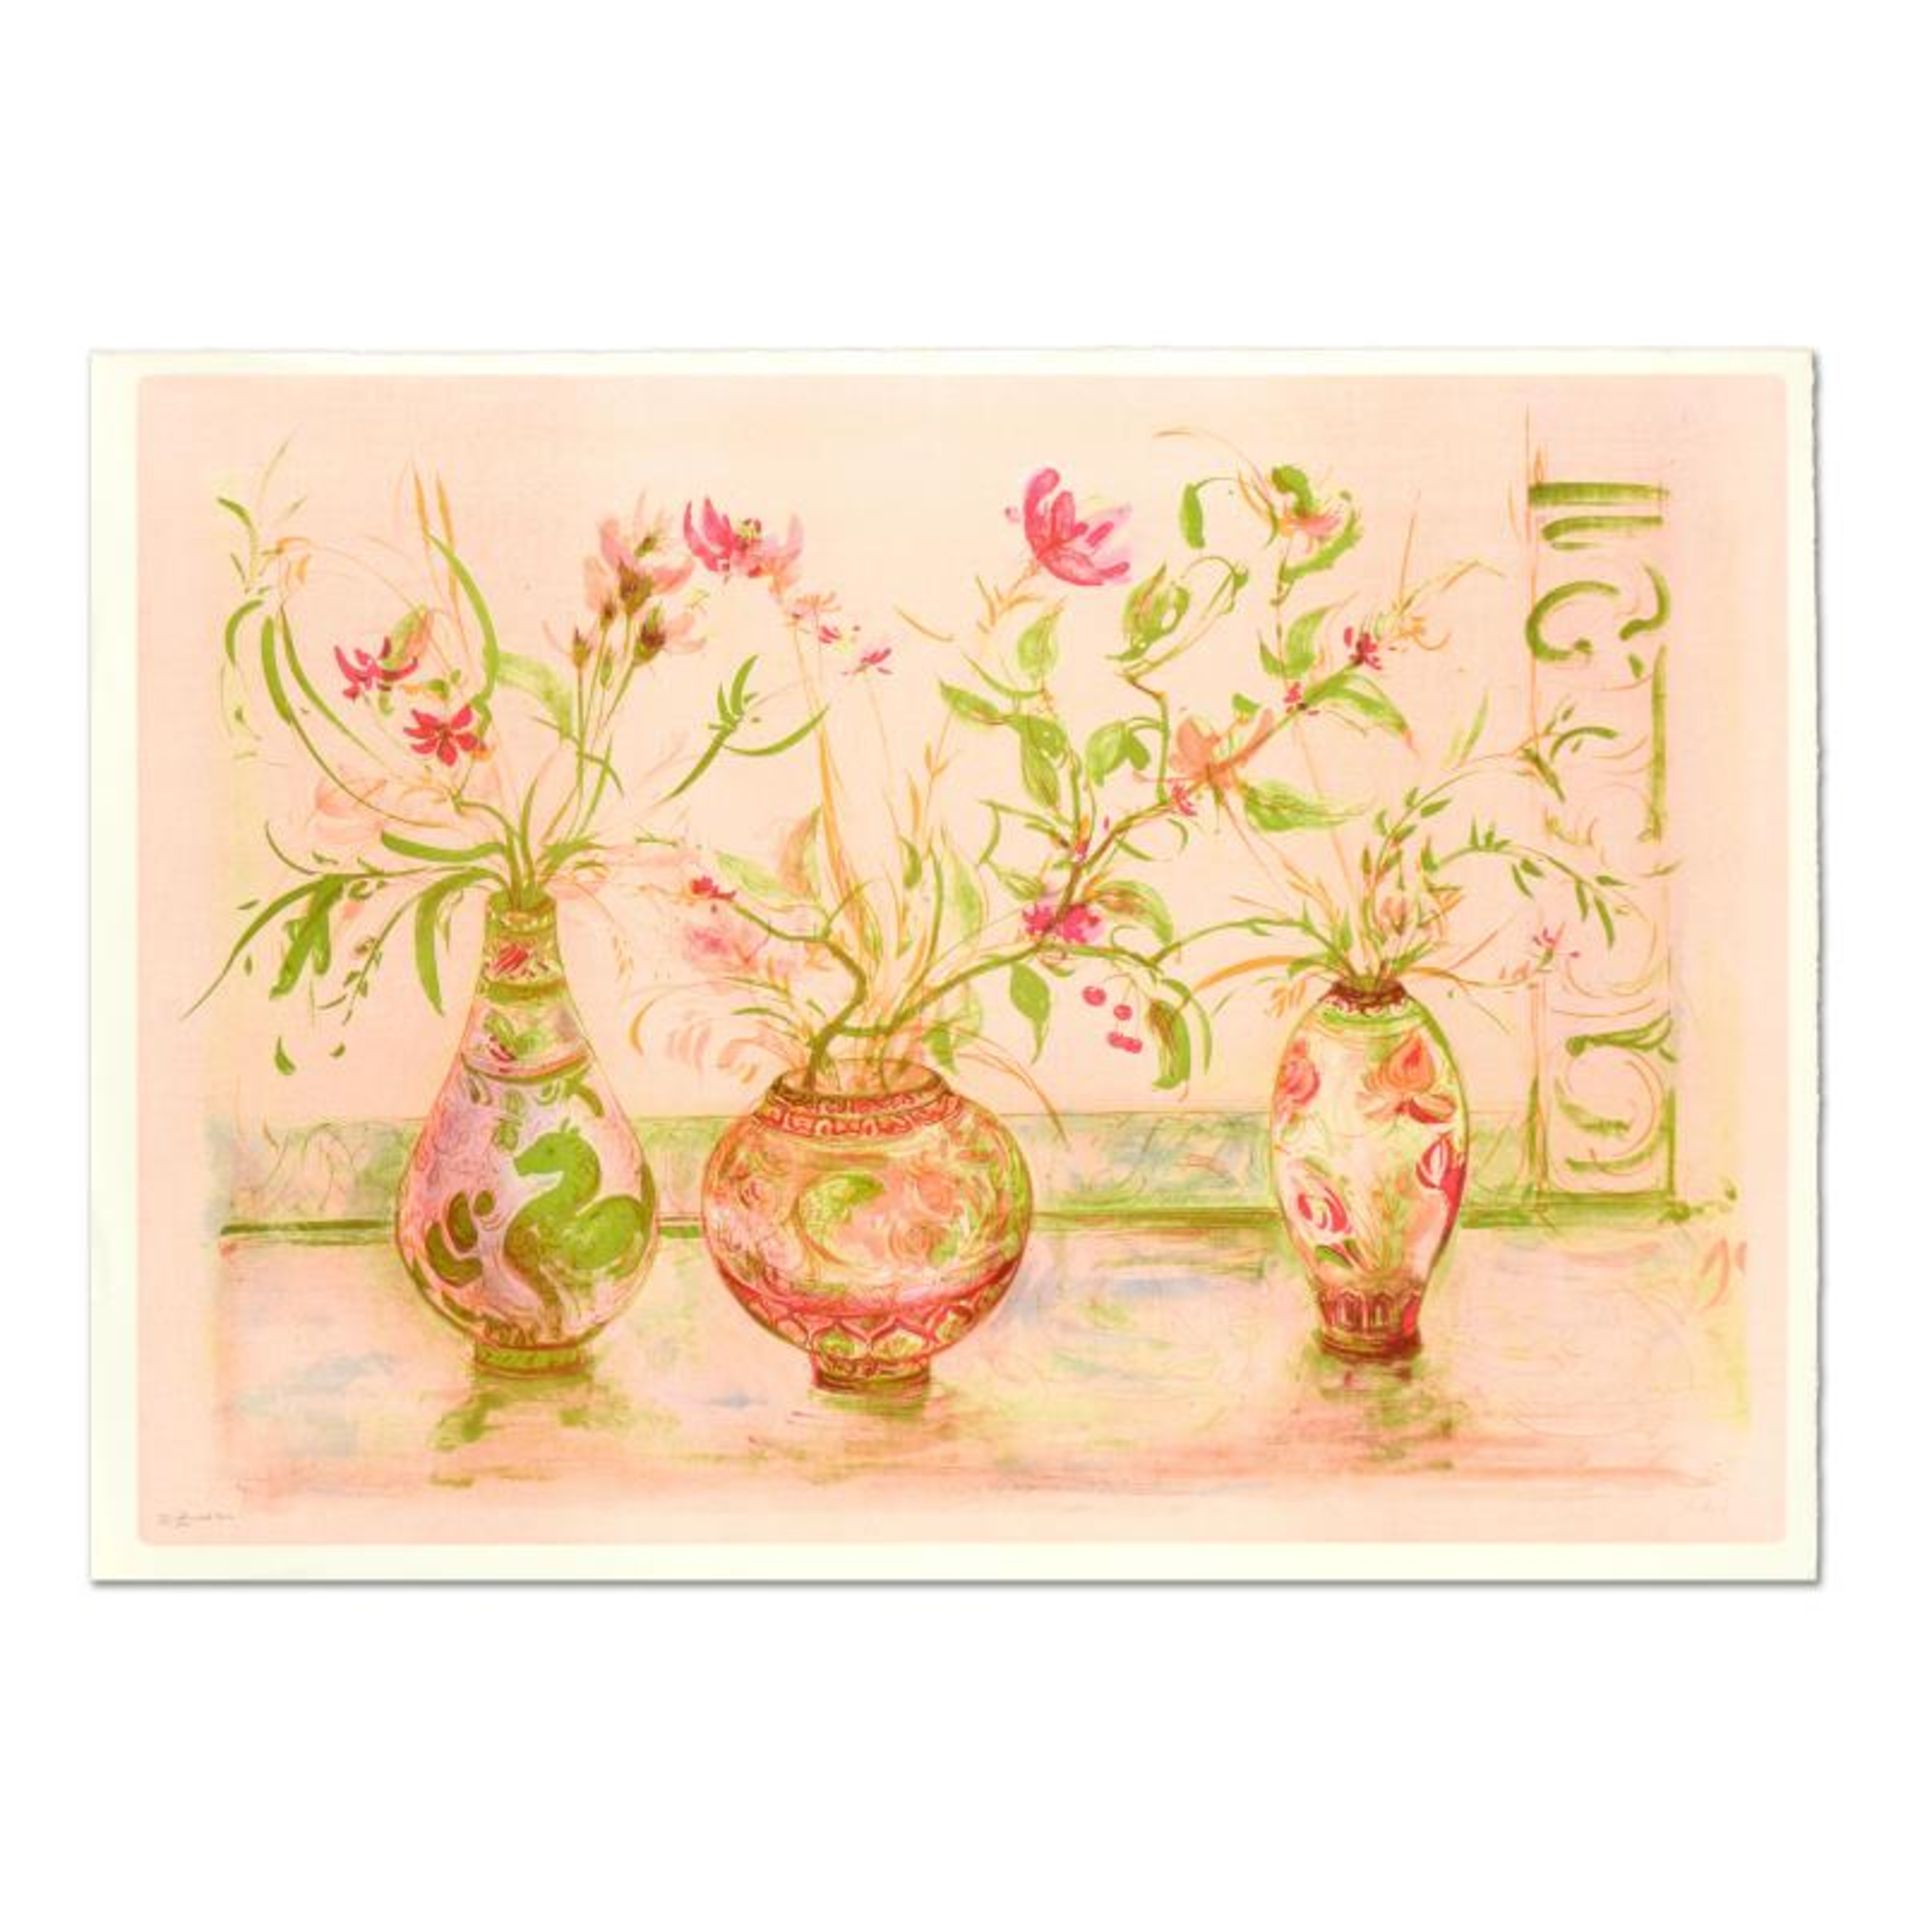 Edna Hibel (1917-2014), "Chinese Vase" Limited Edition Lithograph (41.5" x 29.5"